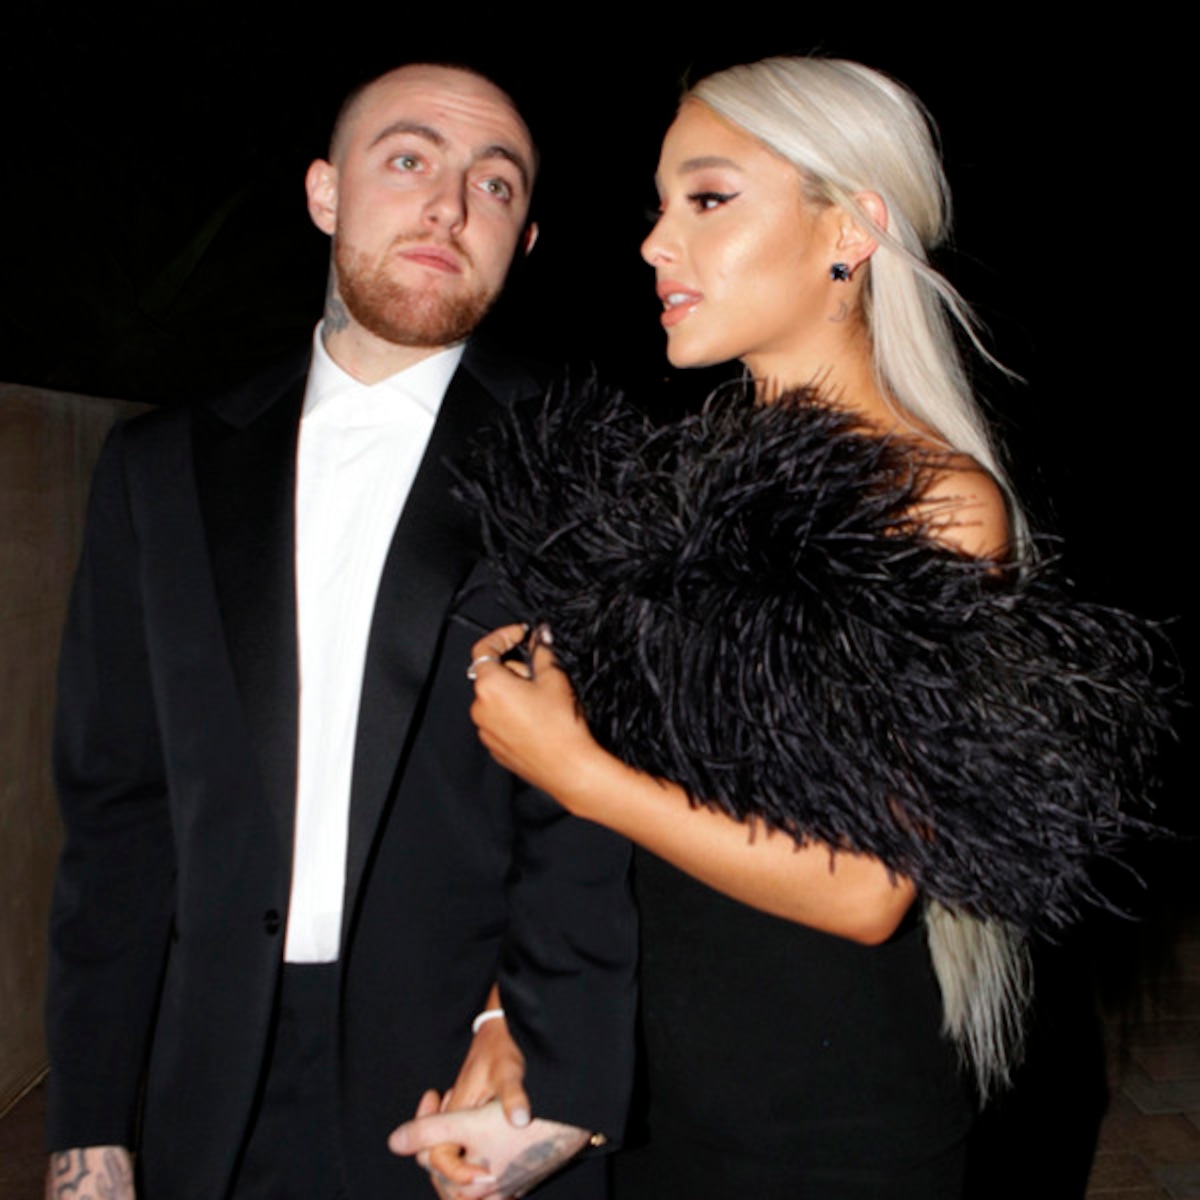 The Truth About Ariana Grandes Relationship With Mac Miller